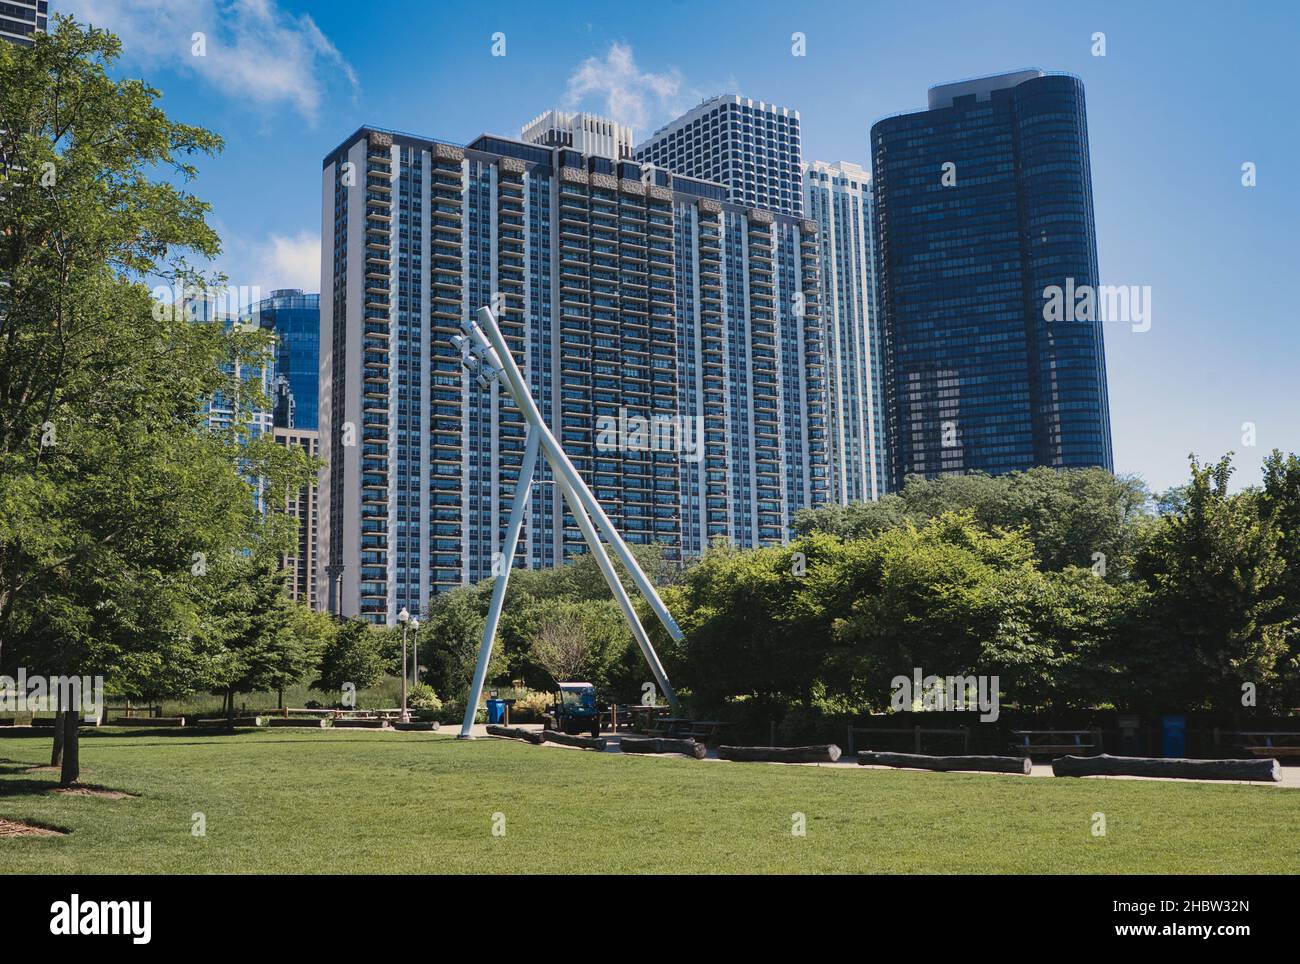 CHICAGO, UNITED STATES - Jun 13, 2021: A bright summer day in Millennium Park in Illinois with modern apartment buildings in the distance Stock Photo